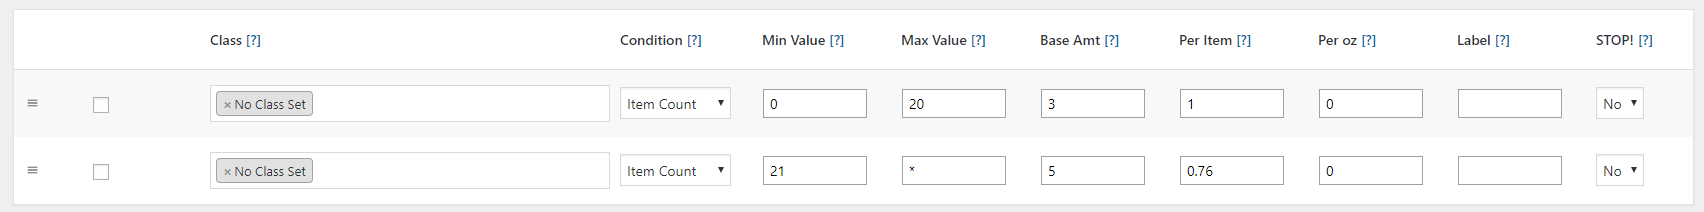 WooCommerce Table Rate Shipping Plugin